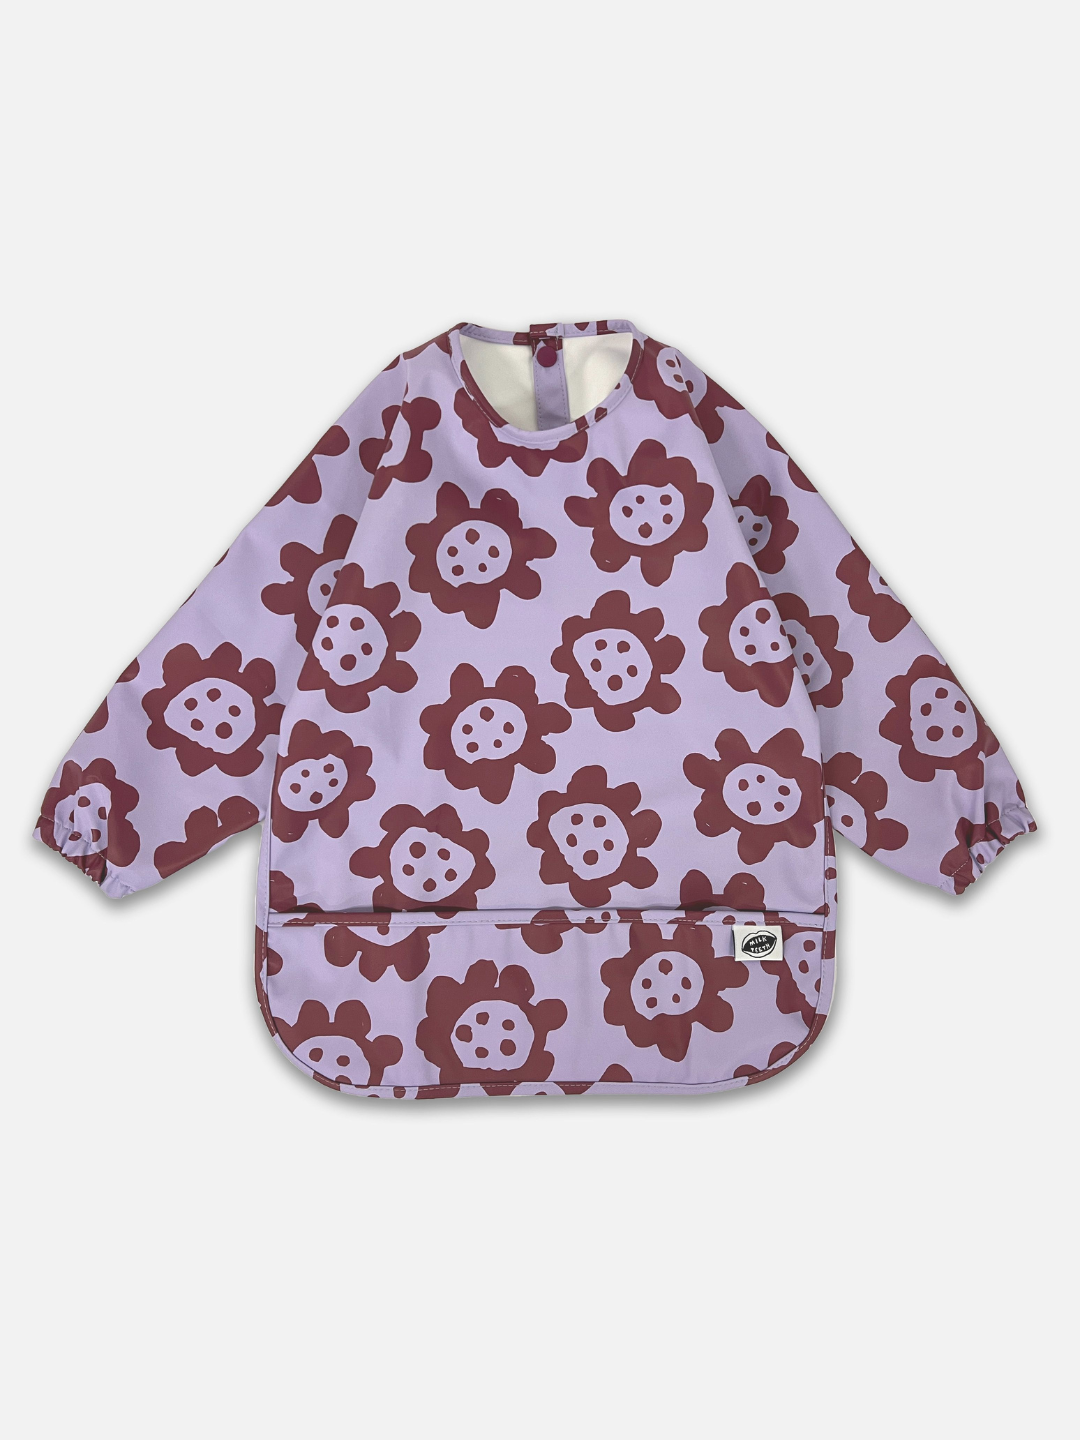 Violet Sunflowers | A front view of the long sleeve lavender colored bib with dark purple sunflowers and a front pocket.